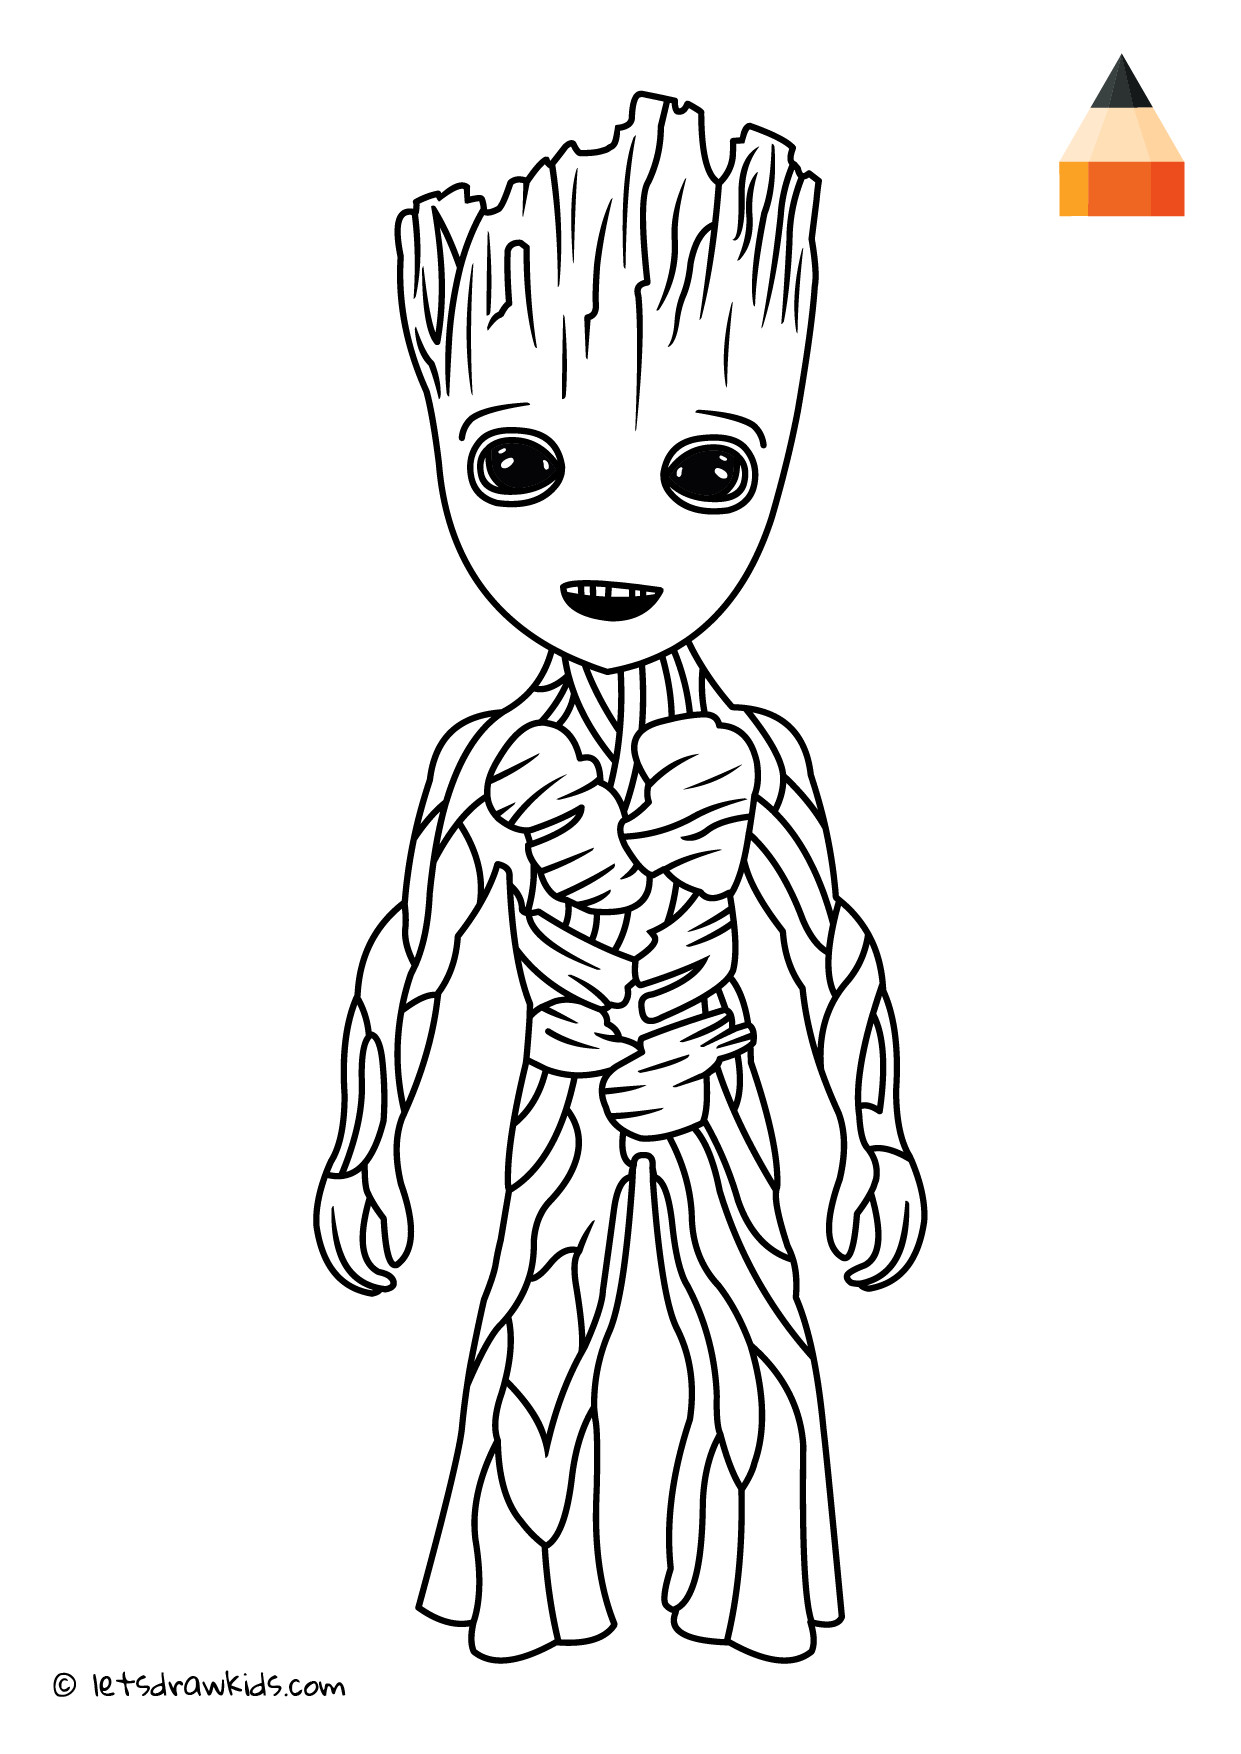 The Best Ideas for Baby Groot Coloring Pages – Home, Family, Style and